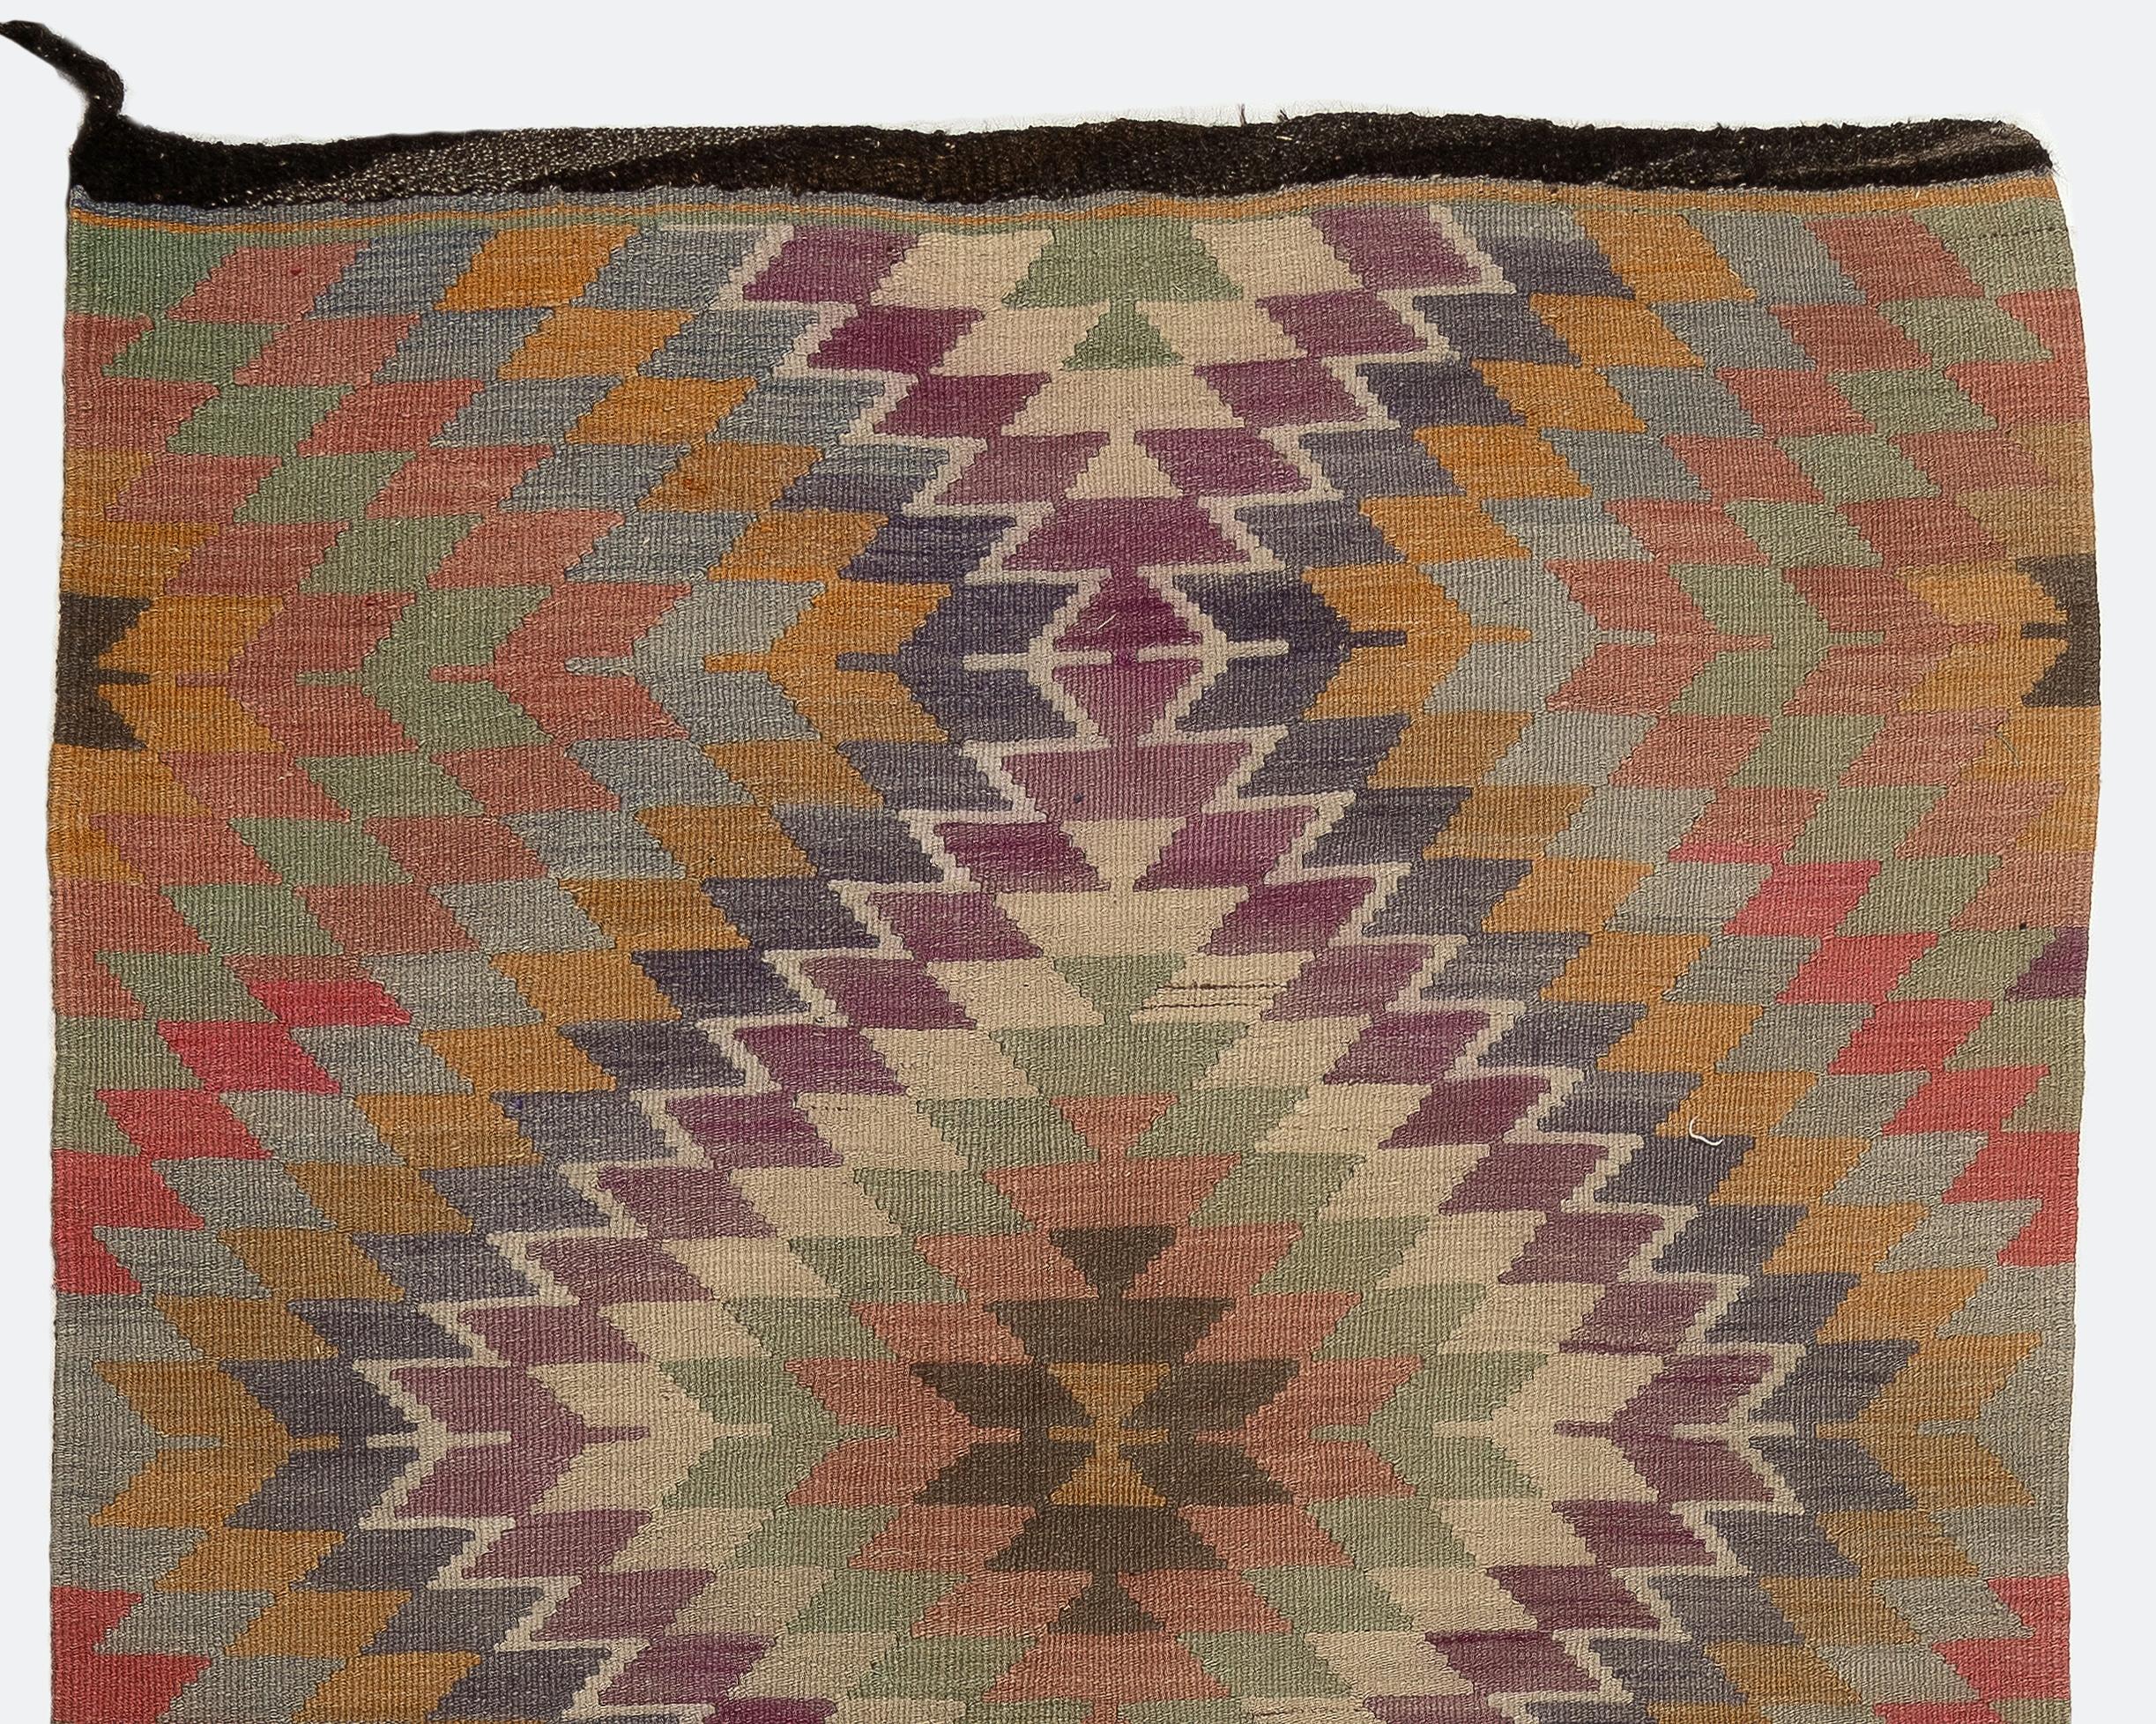 Vintage handwoven flat-weave (kilim) runner with a design of nested stepped diamonds in soft earthy tones. Made of 100% wool. Size: 4.7 x 11 ft.
Reversible; both sides can be used. Lightweight, easy to pick up and lay down.
Ideal for both